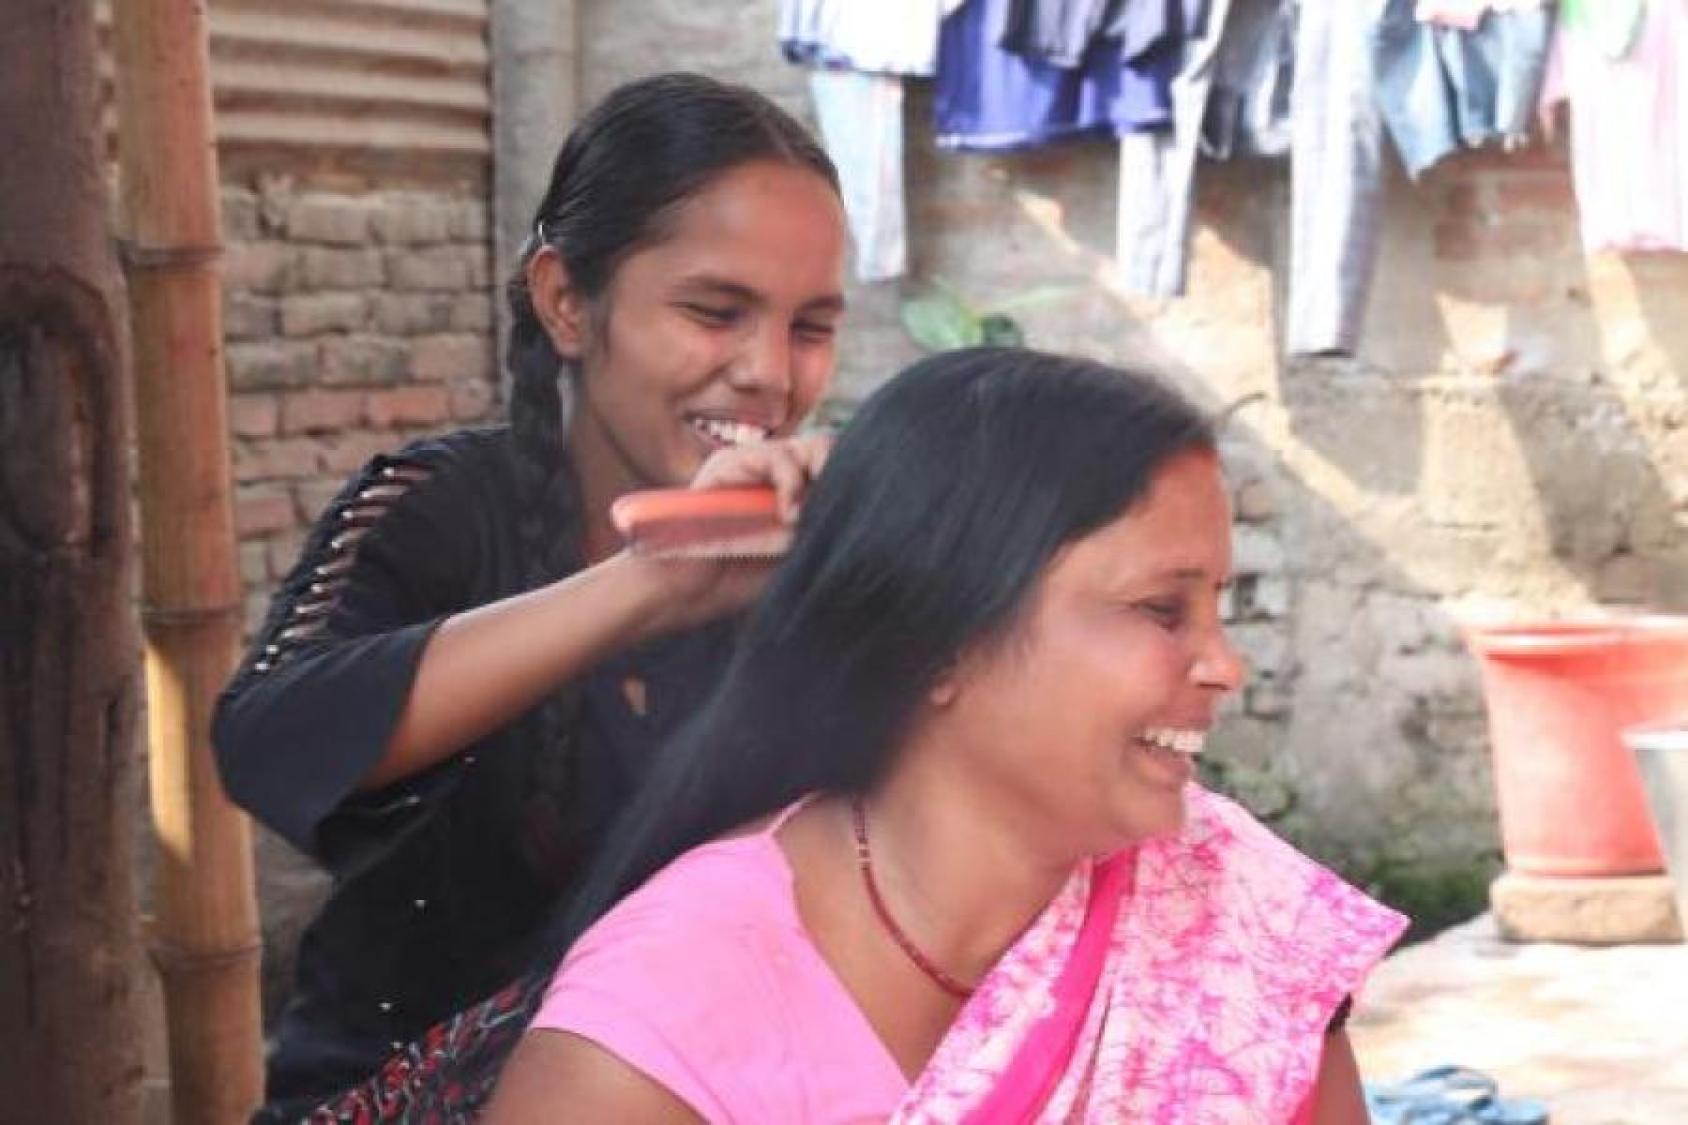 A smiling girl brushes her mother's hair.